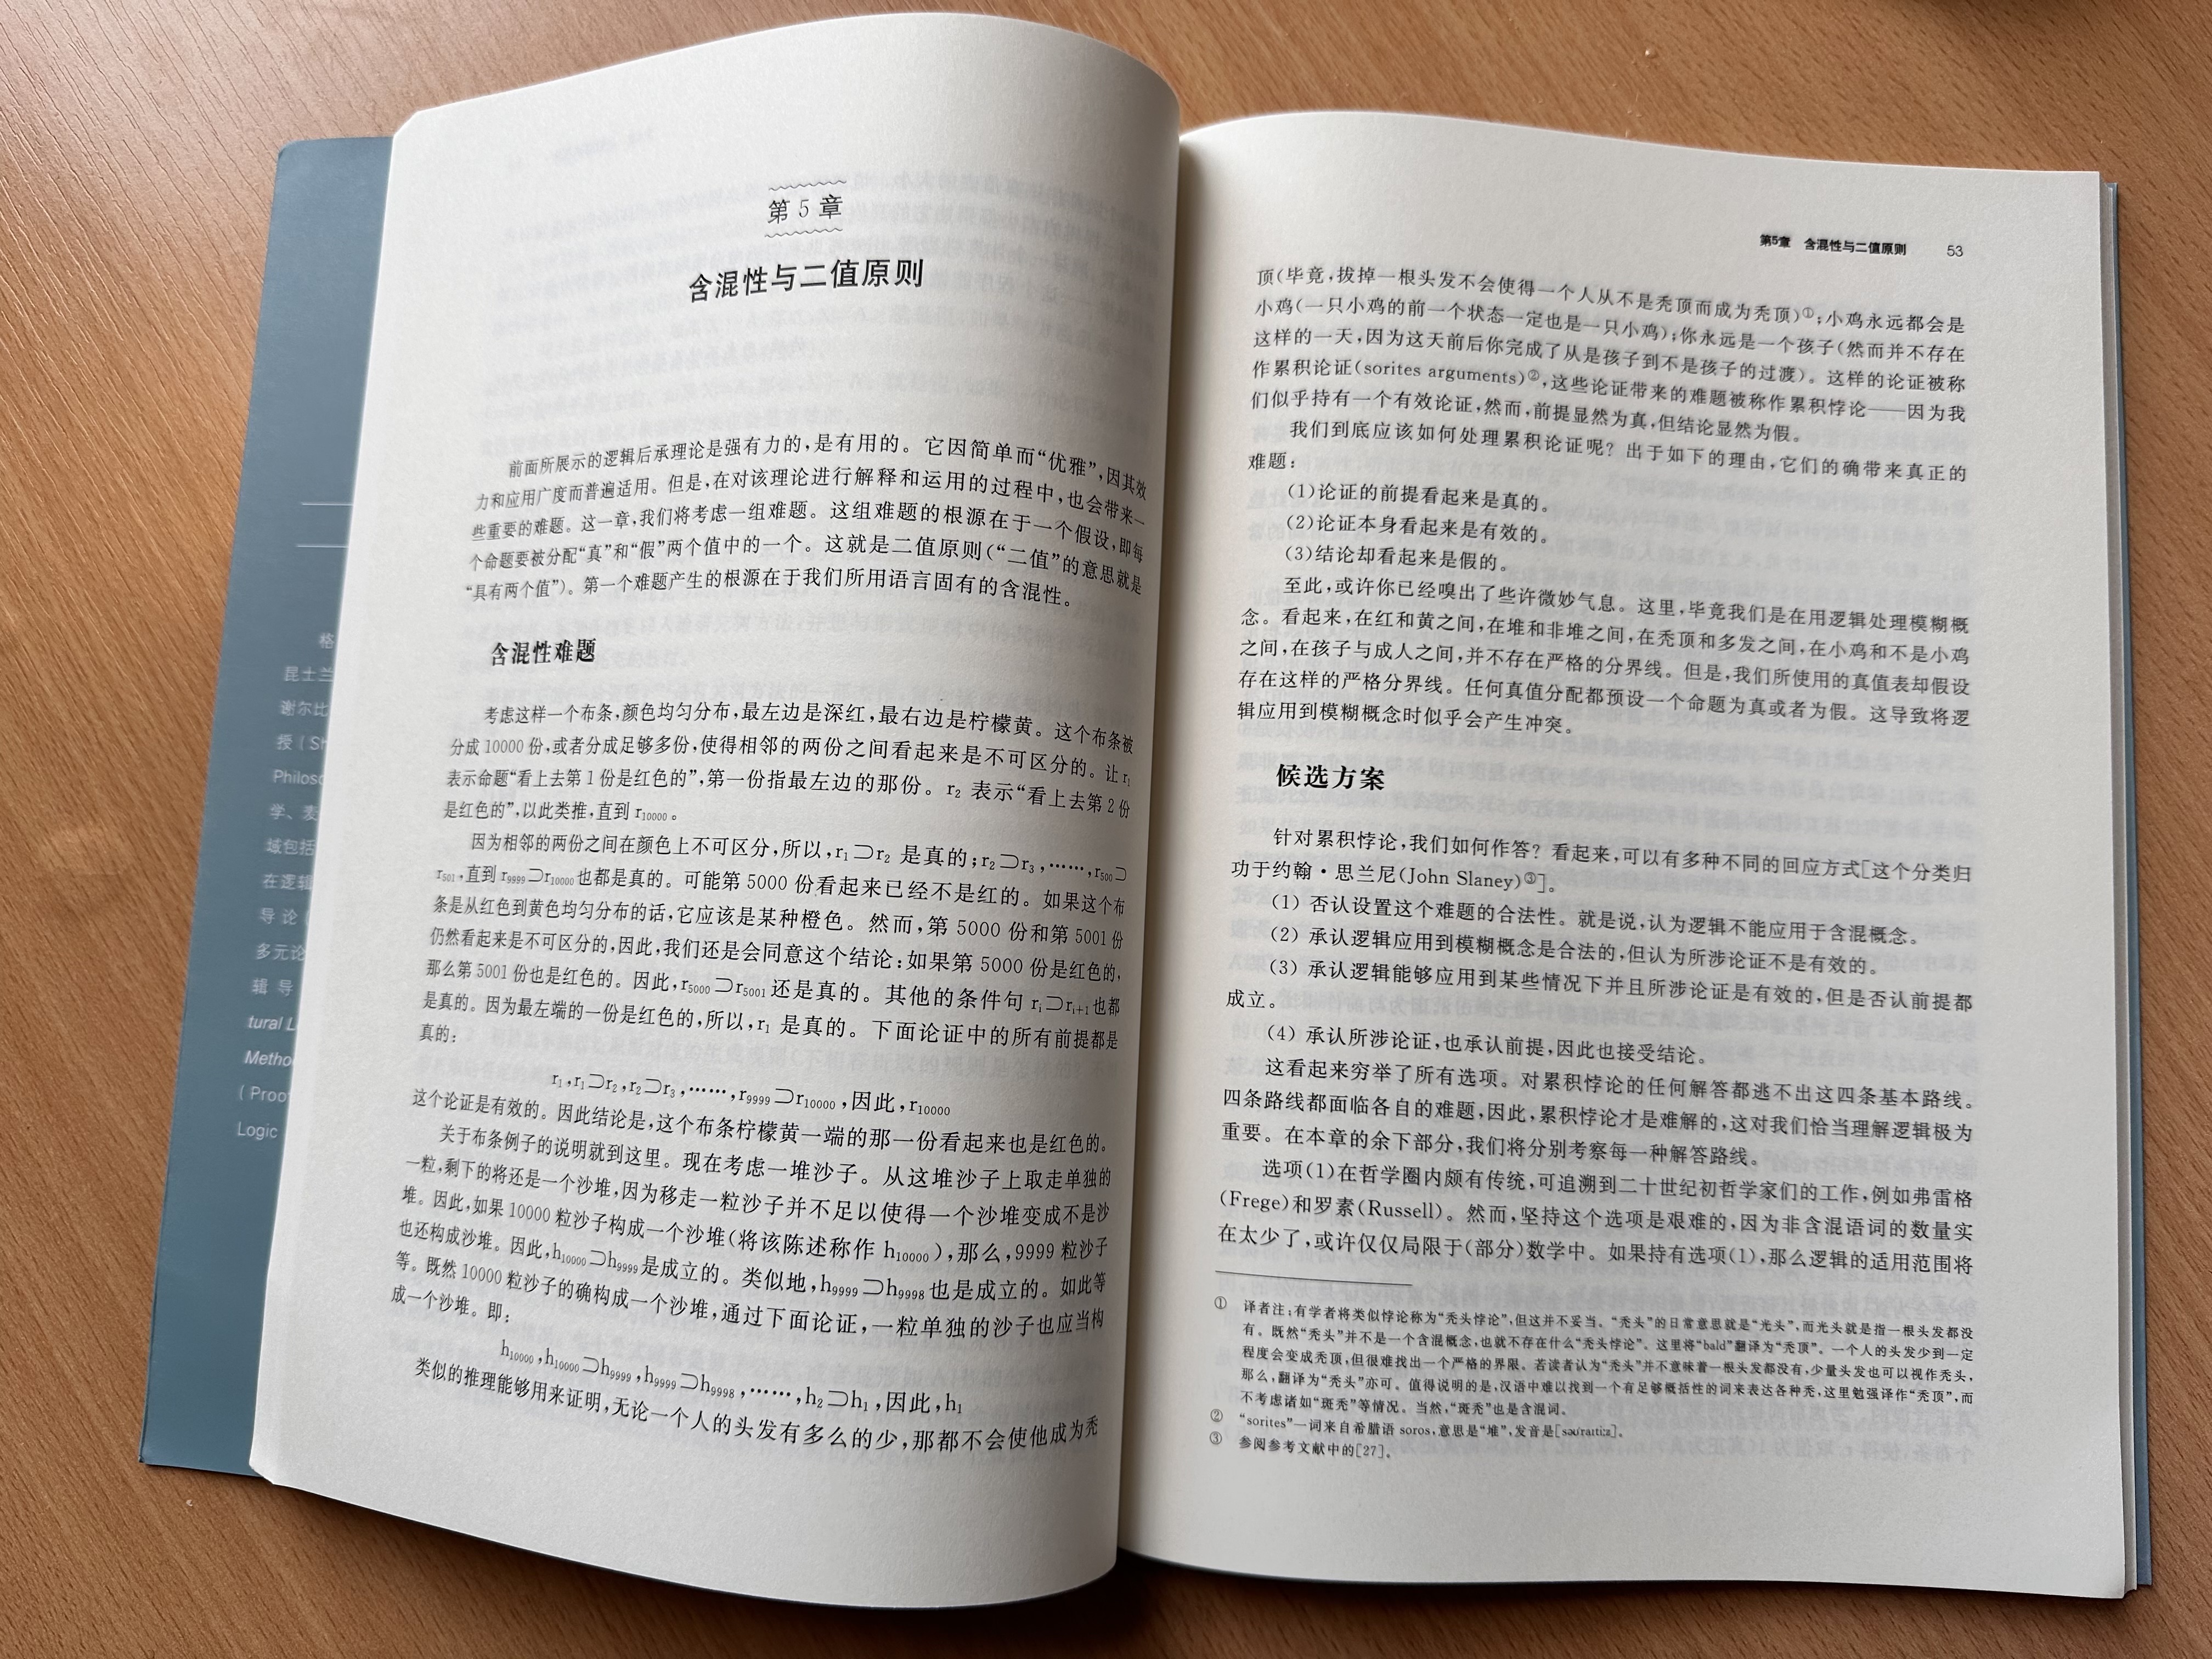 A page spread of the beginning of Chapter 5 of a Chinese translation of a logic text